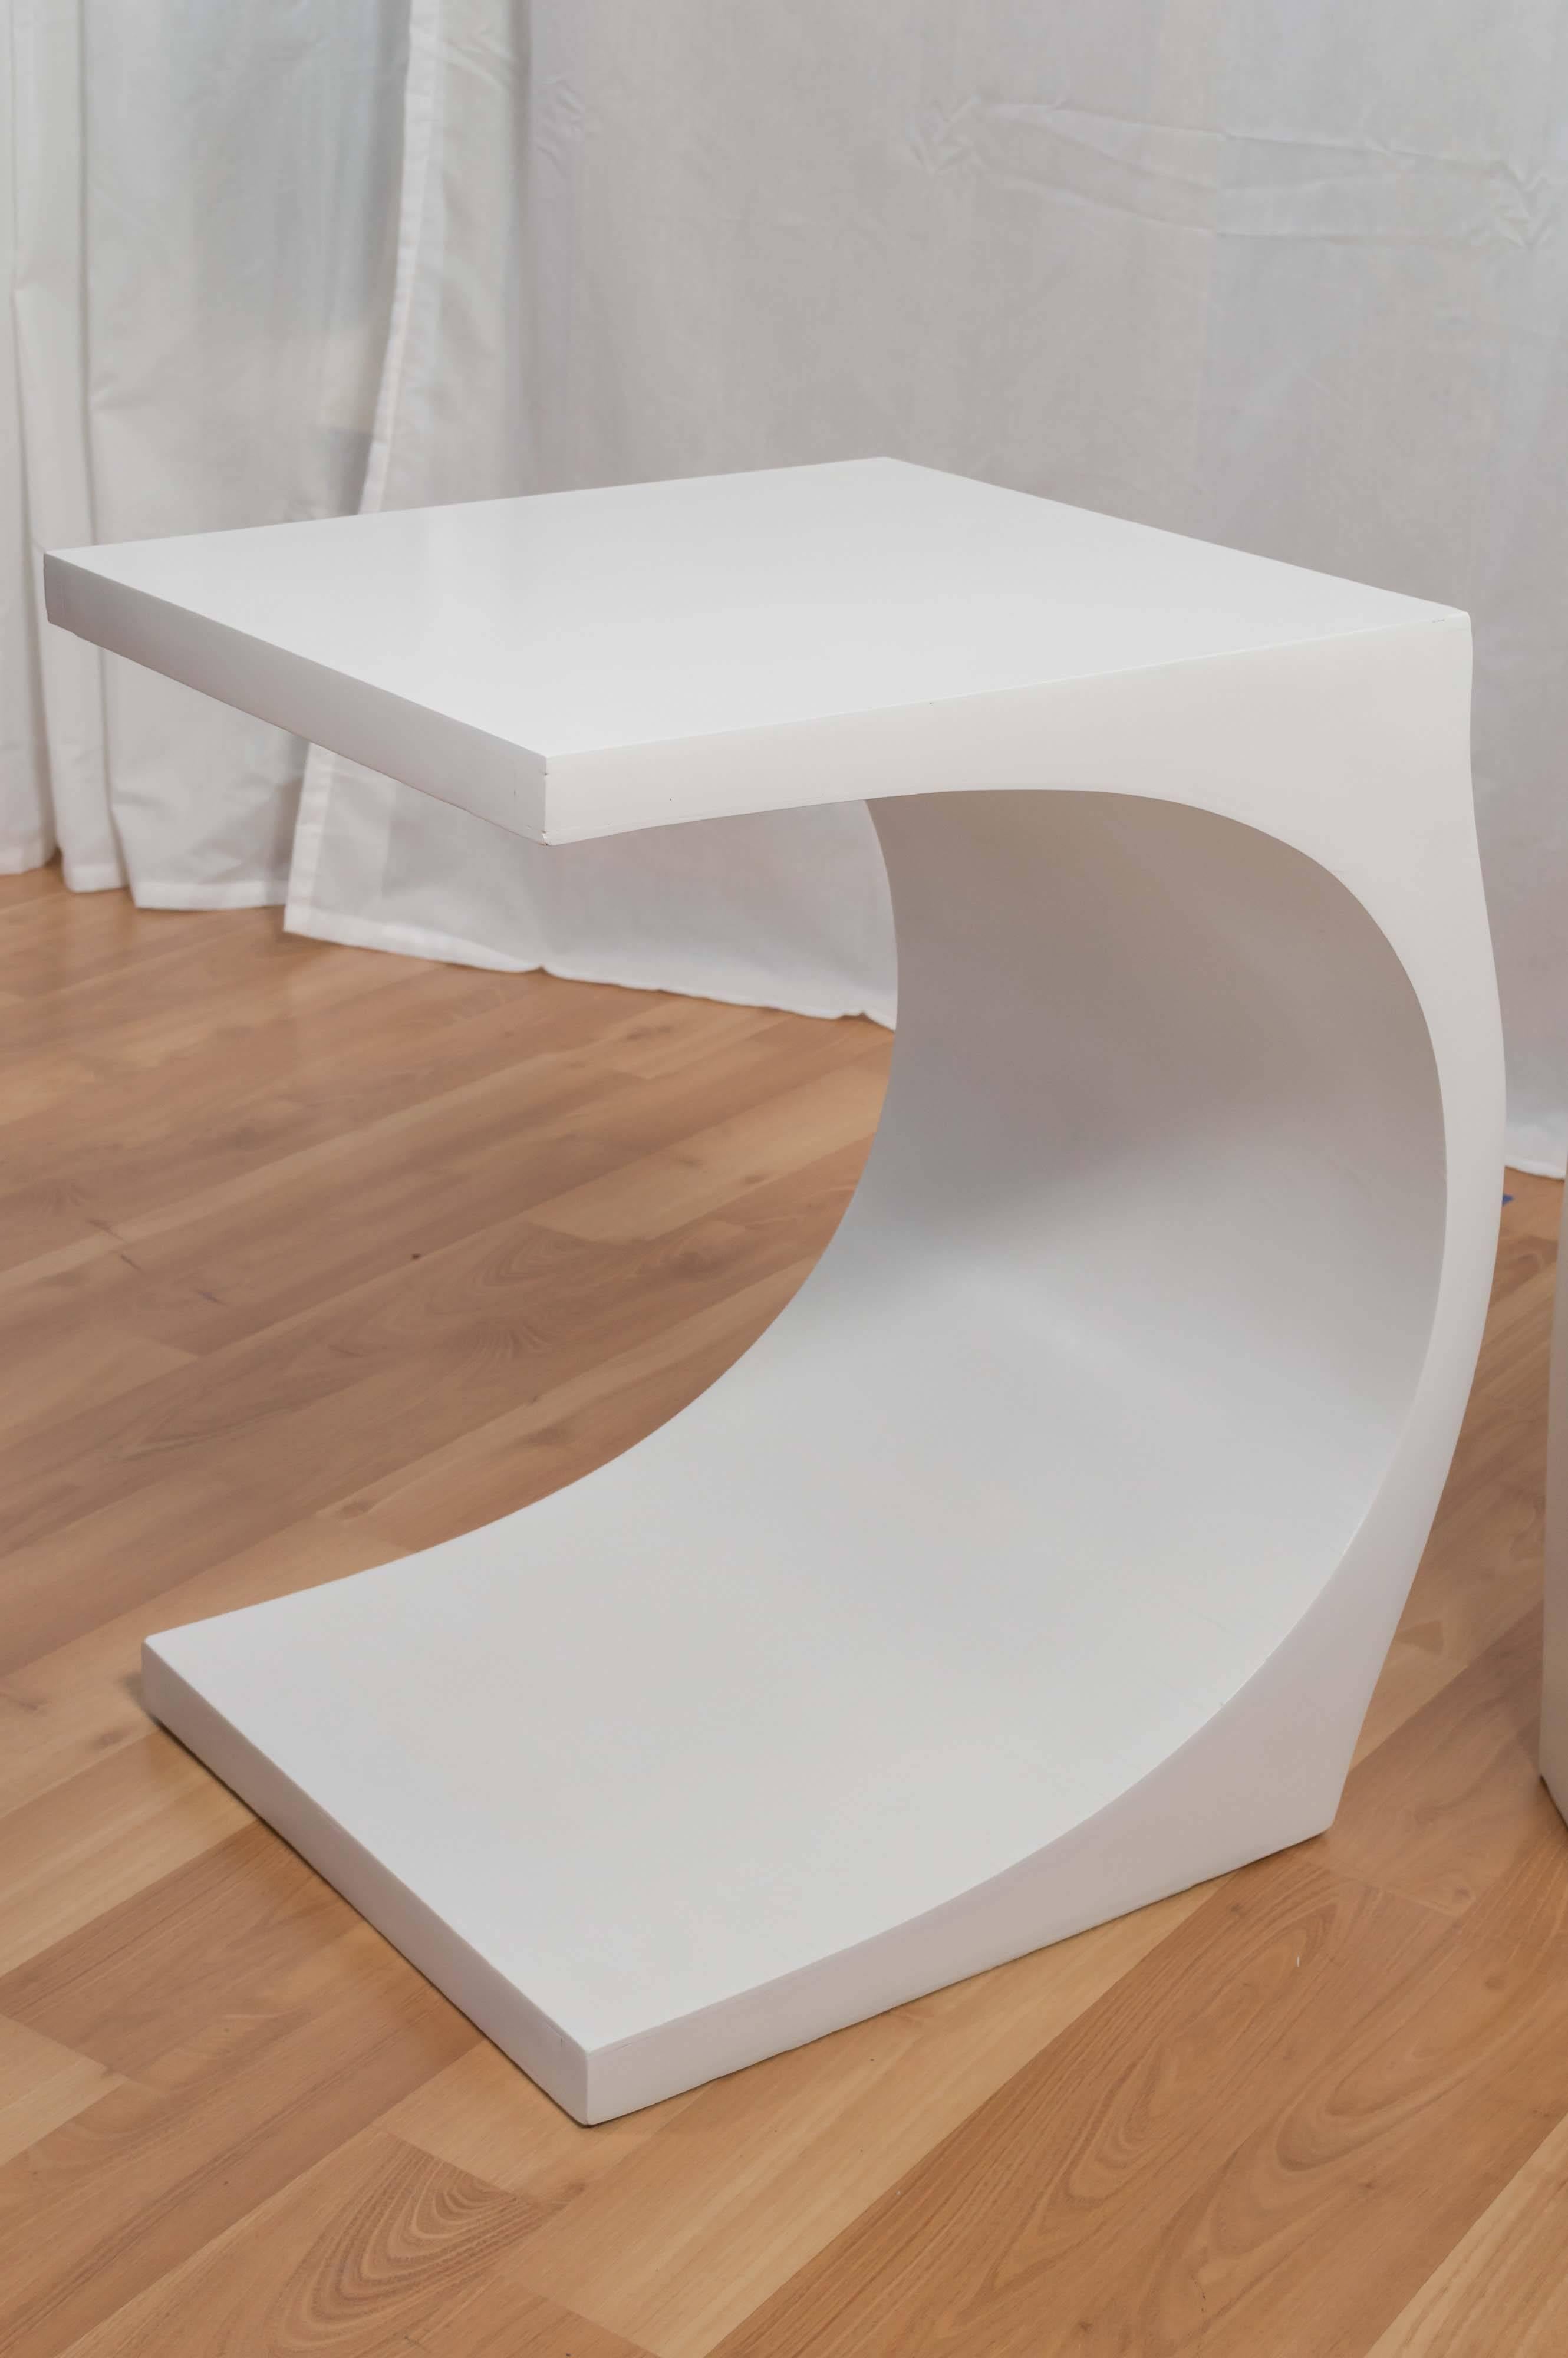 Uncommon modeline wood end tables finished in bright white lacquer that would pair perfectly with the sculptural lighting designer’s iconic “Cobra” floor lamp. 

The svelte tables give the playful appearance of buckling under the weight of